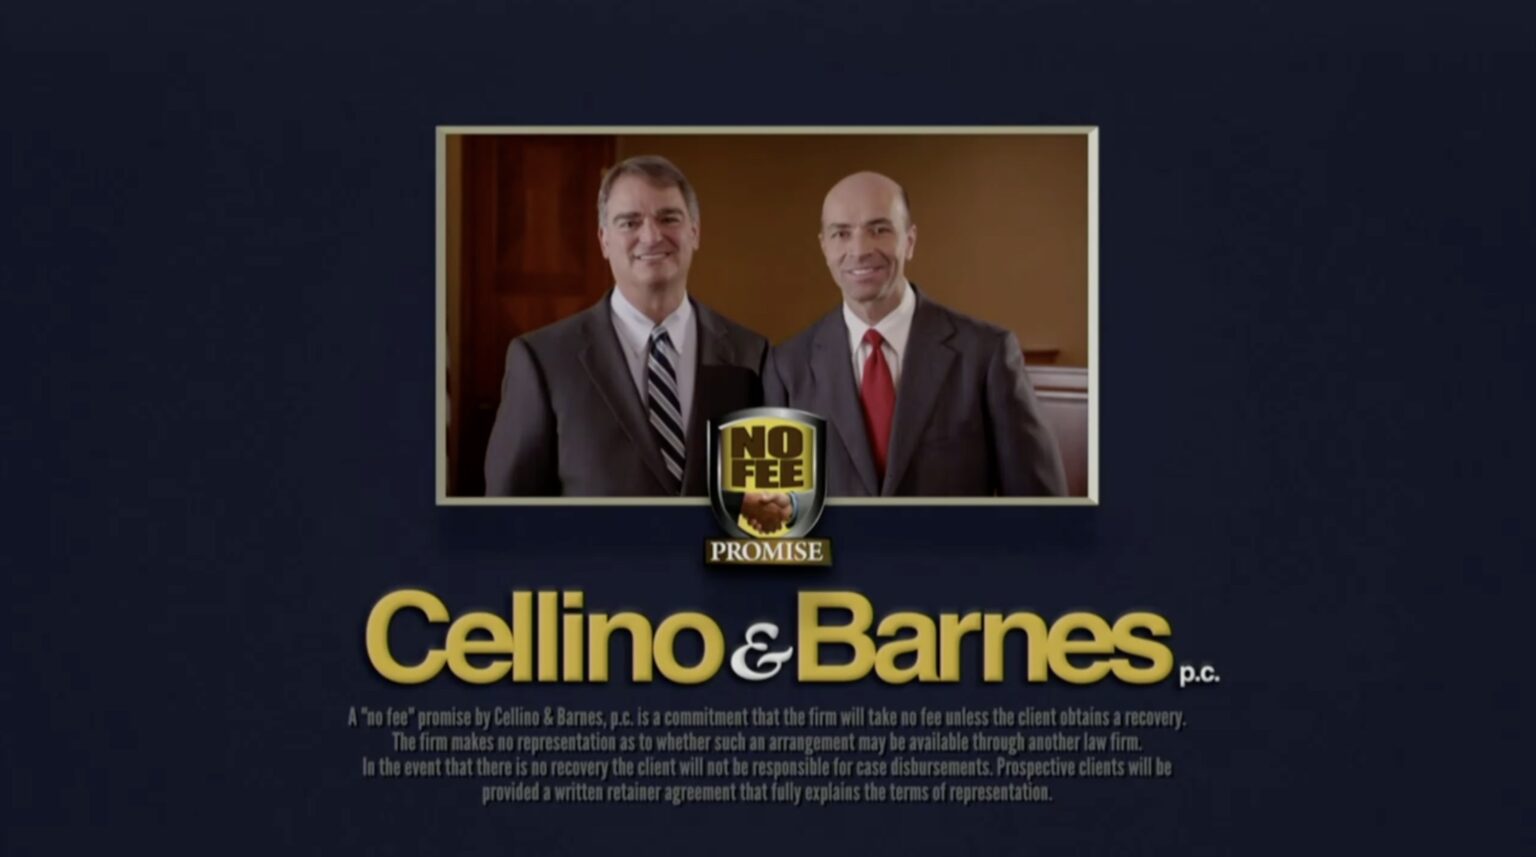 Is the Barnes firm related to Cellino and Barnes?